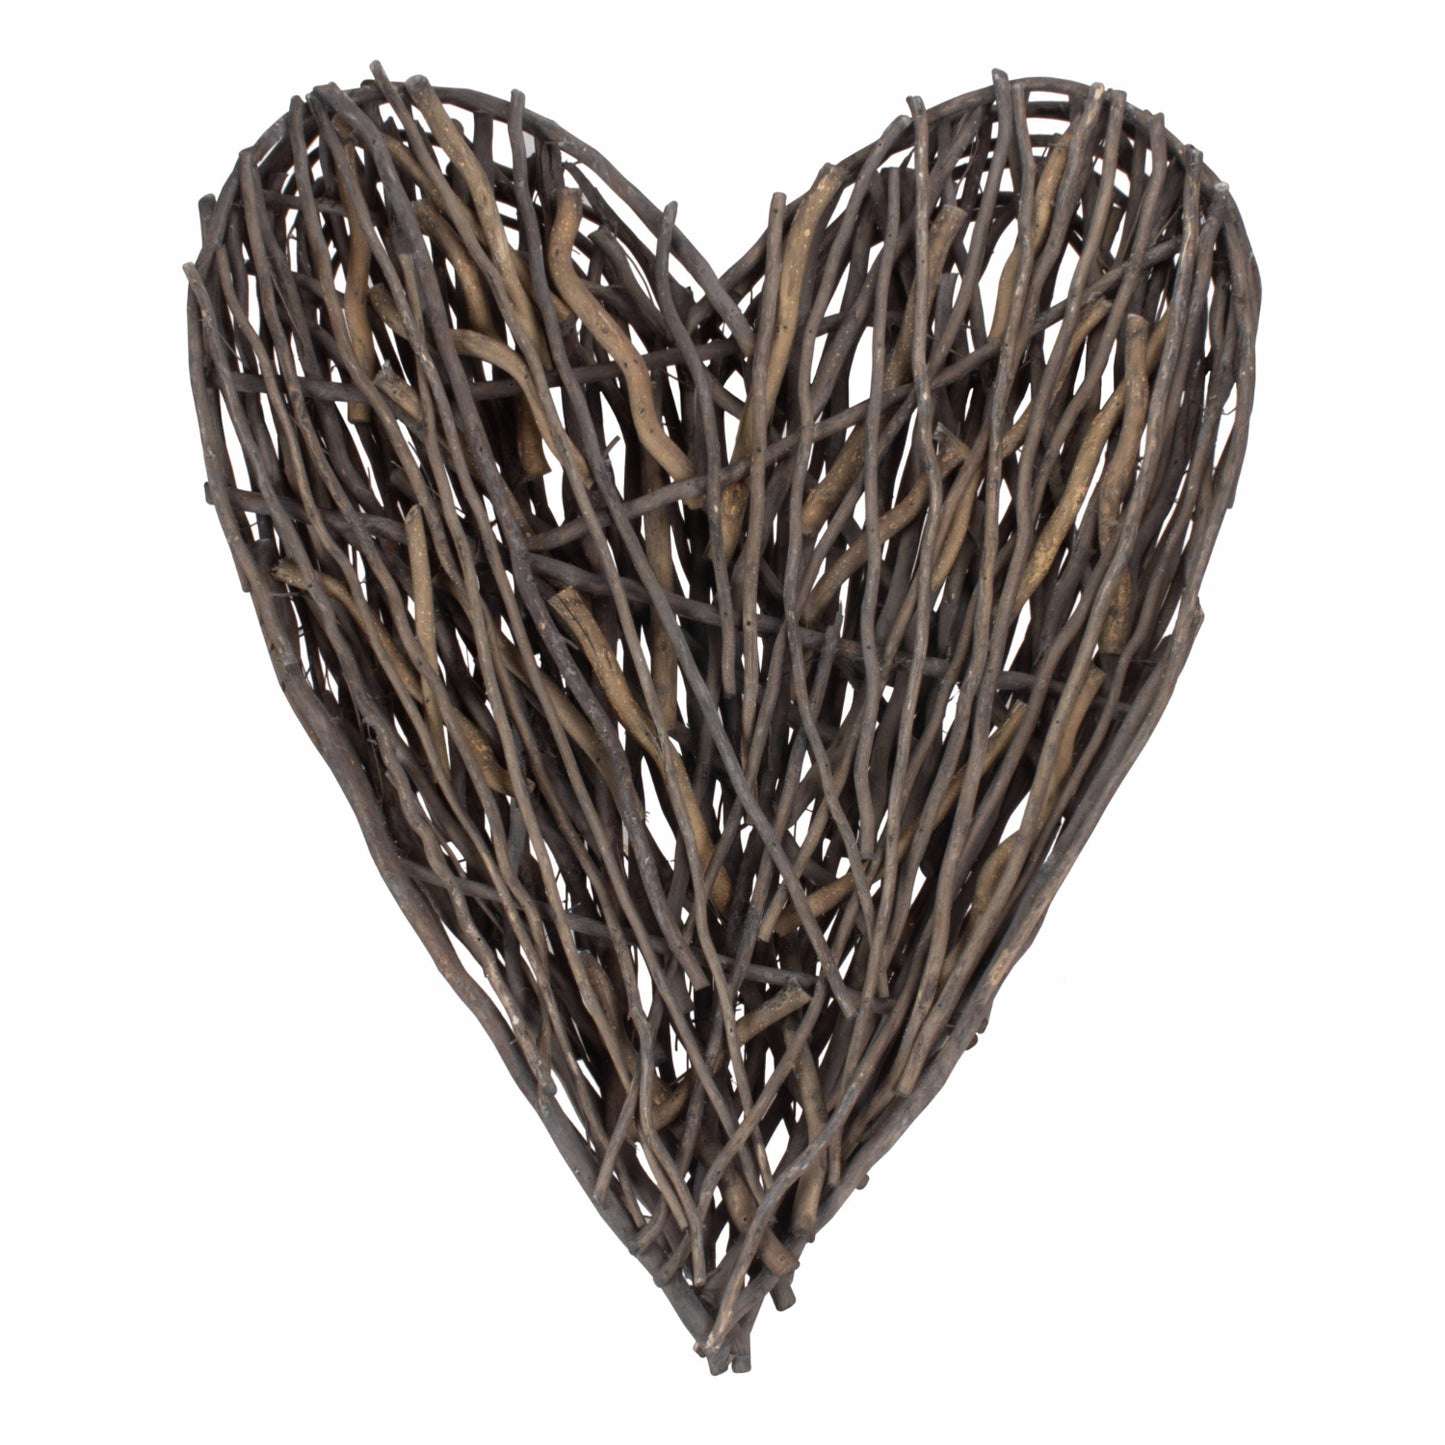 Large Rustic Willow Heart